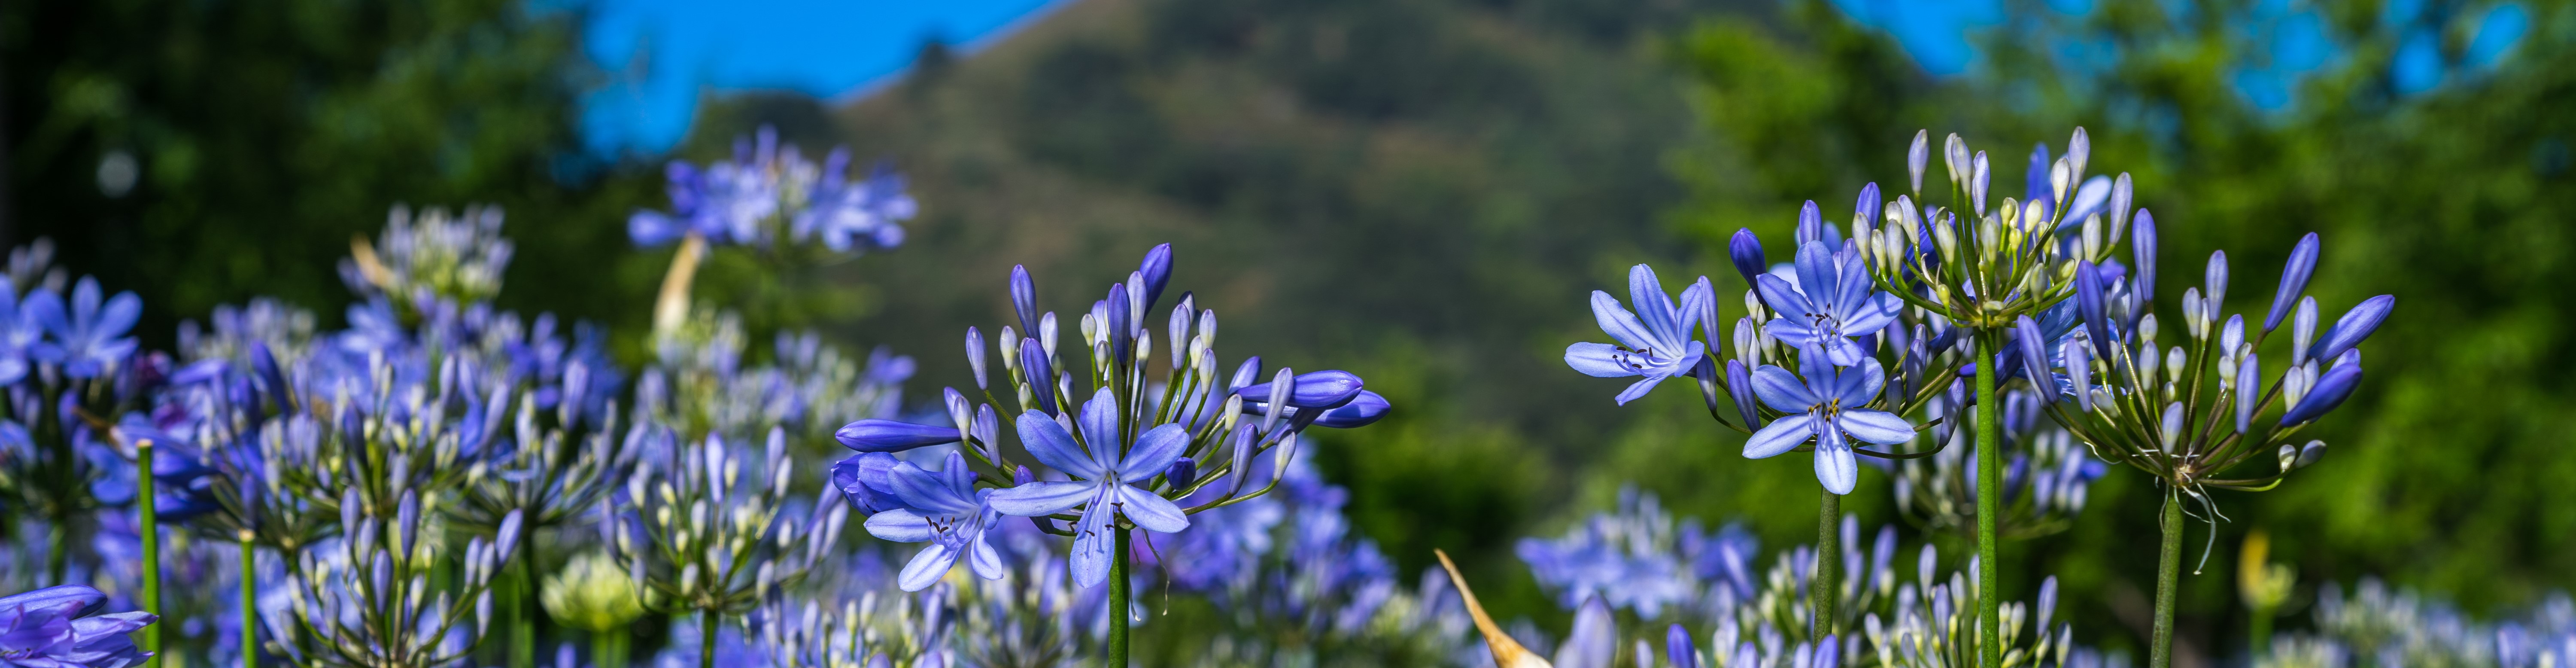 image of agapanthus flowers